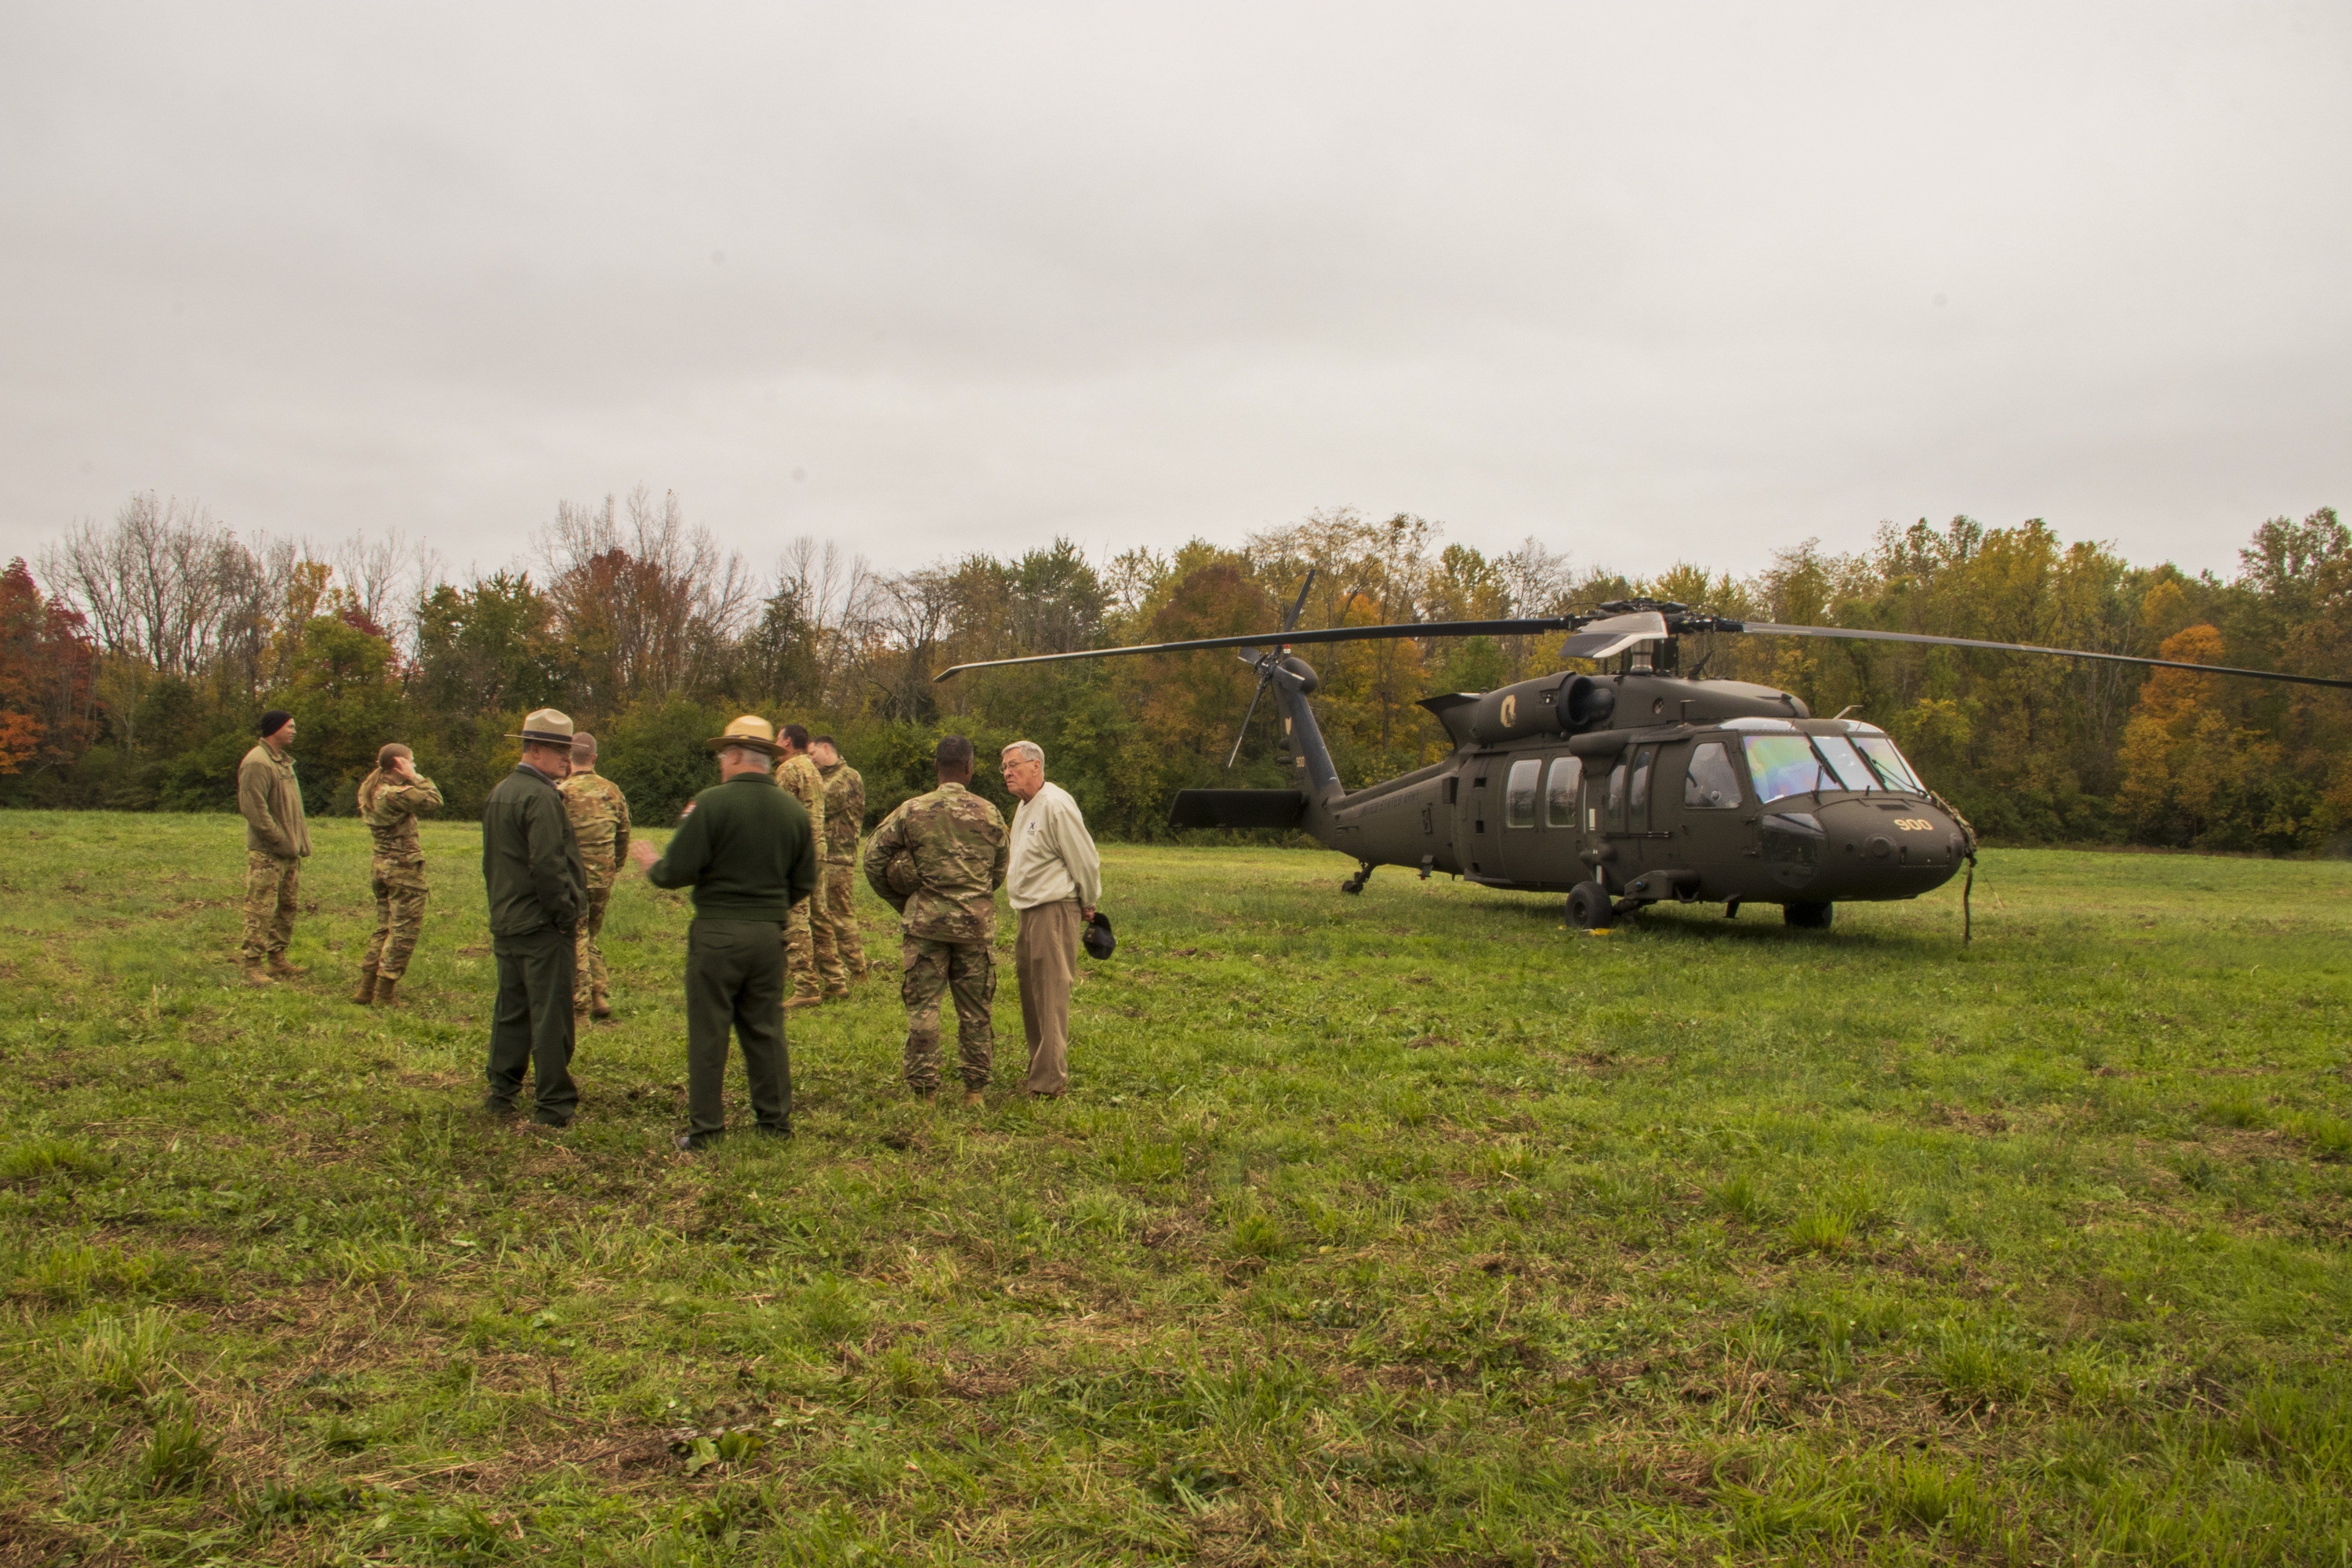 Several people in tan-colored camouflage uniforms and two park rangers with flat hats stand to the left of a parked helicopter in a grassy field.